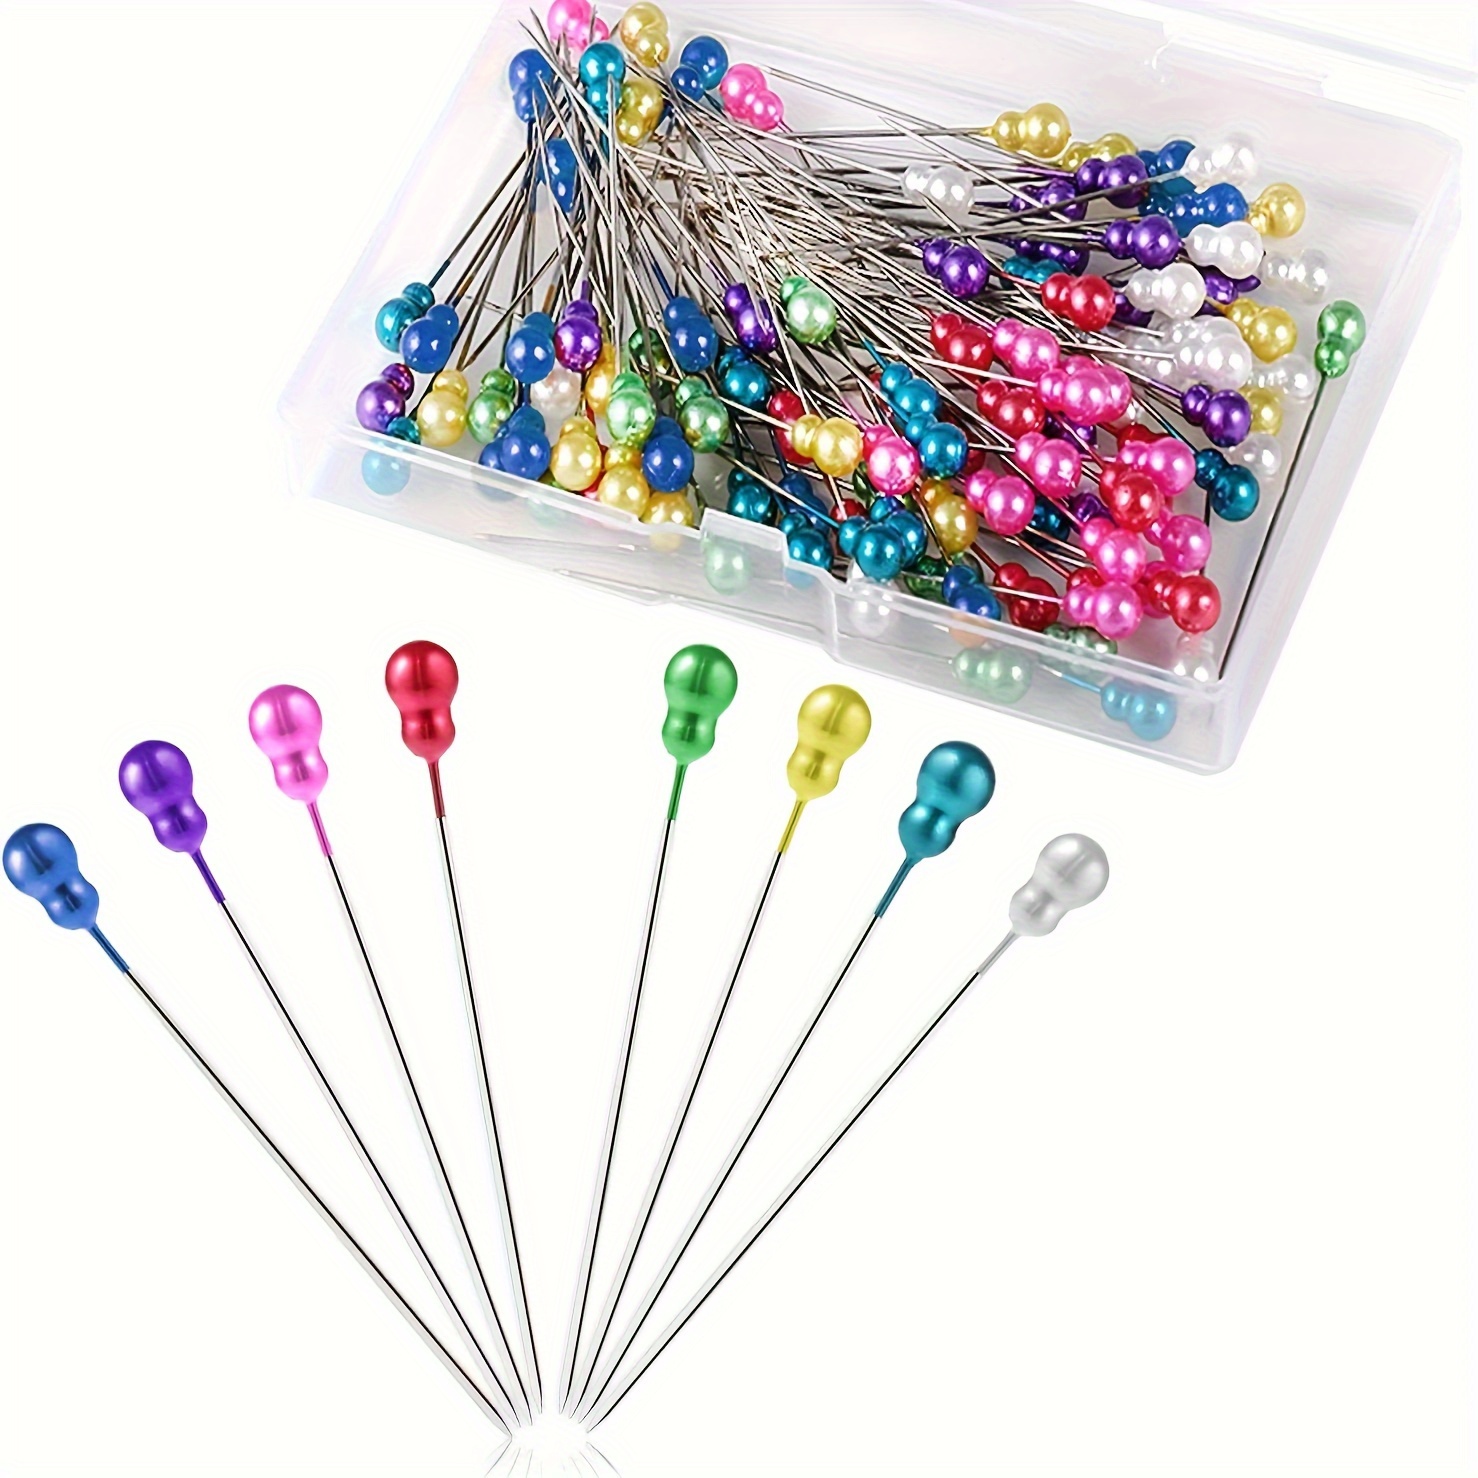 

80pcs Sewing Pins For Fabric, 5.5 Cm Pumpkin Shape Decorative Straight Pins For Corsage Coloured Pins With Head For Bouquets Fabrics Sewing Dressmaking Sewing